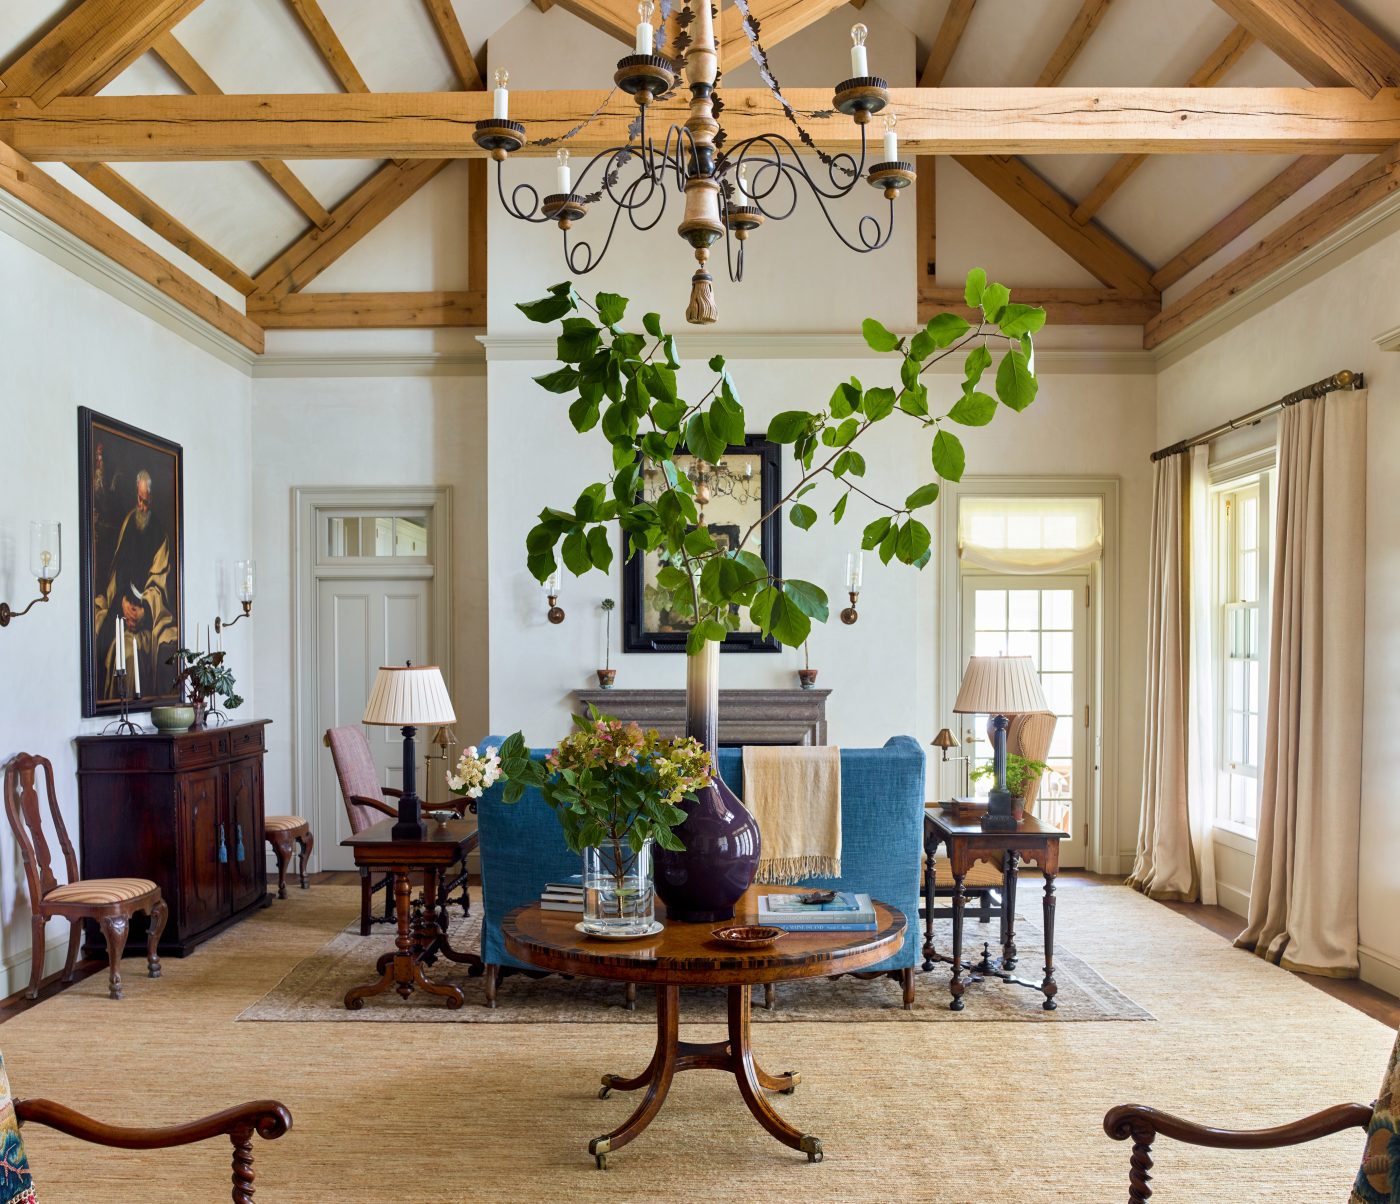 Living room in Downeast Maine by Gil Schafer III in his new book Home at Last: Enduring Design for the New American Home Rizzoli publisher written with Mark Kristal